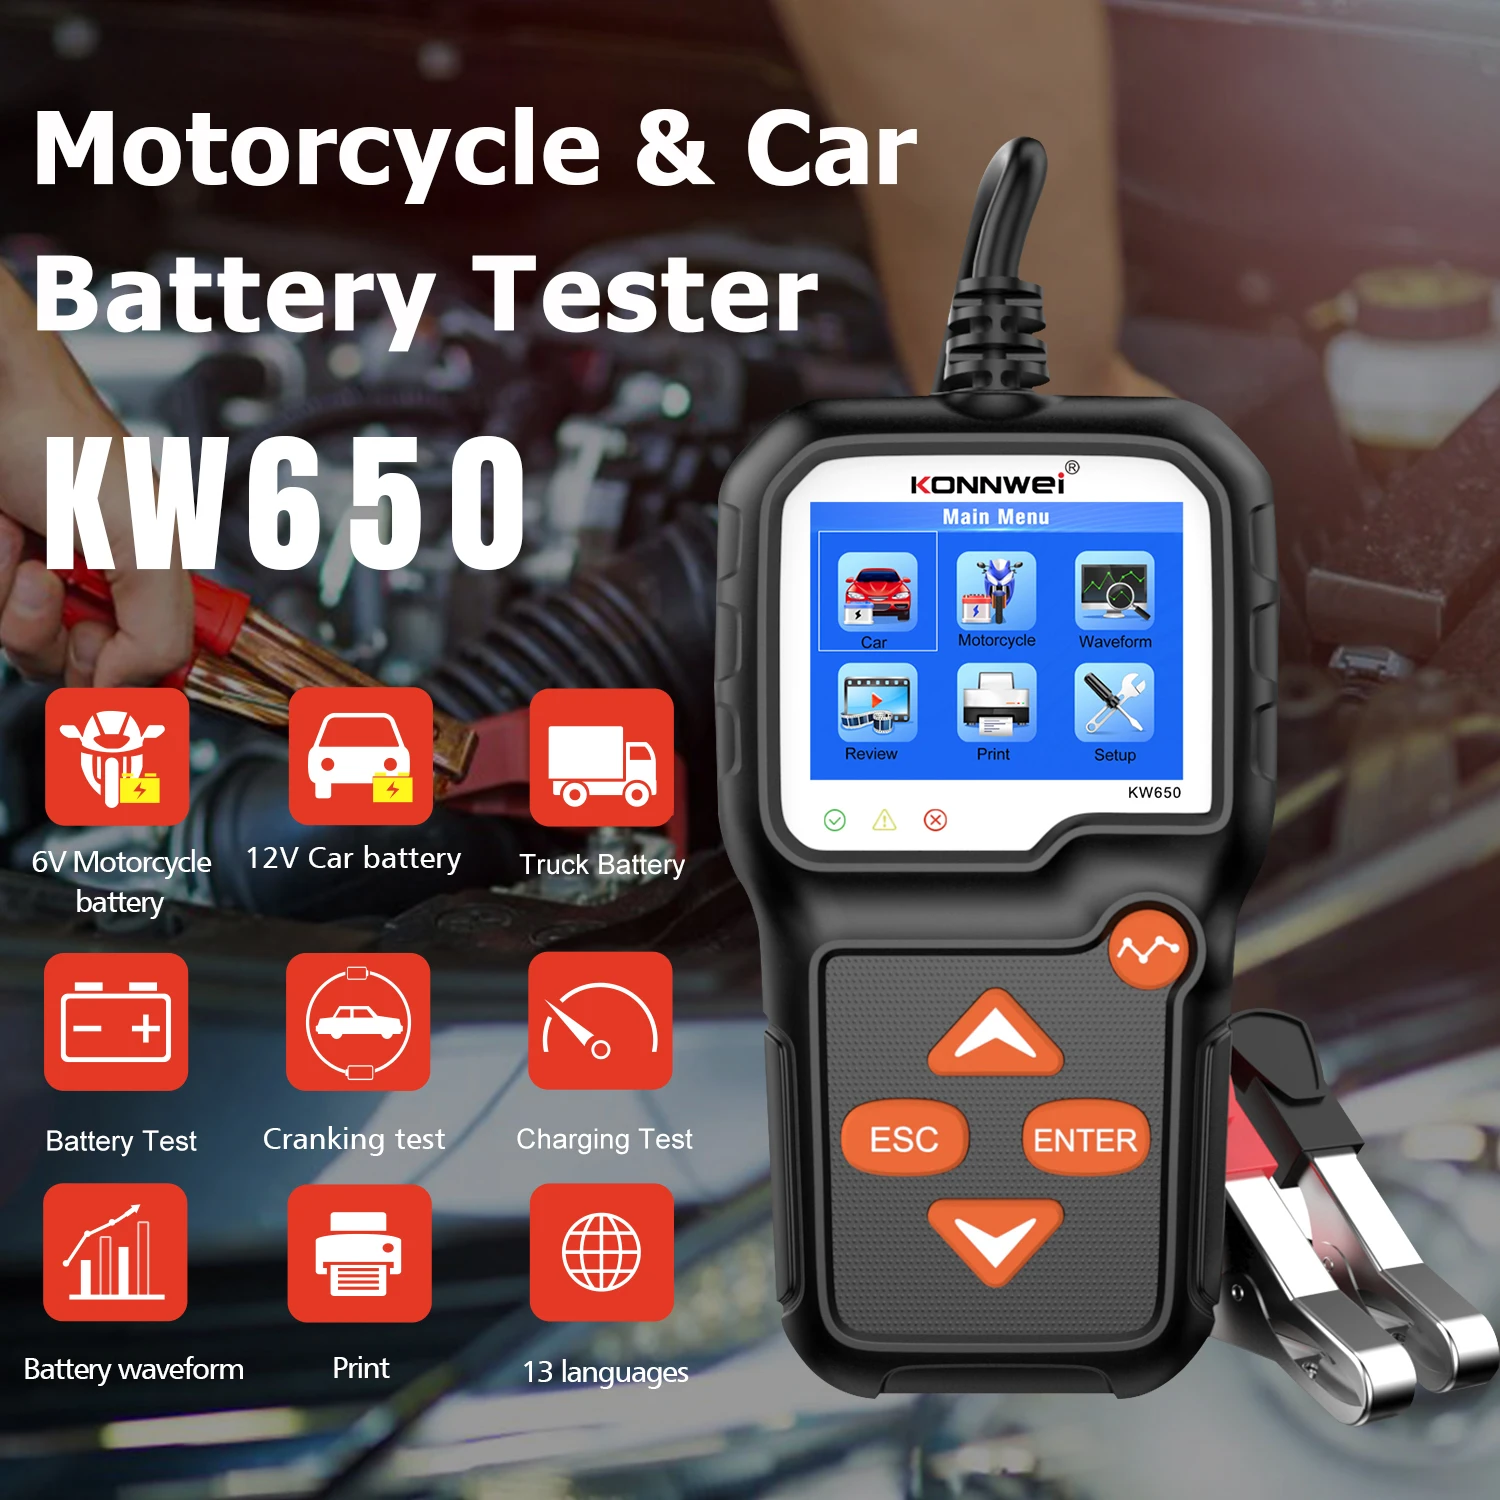 

KONNWEI KW650 Car Motorcycle Battery Tester 6V 12V Auto Battery Analyzer 100 to 2000 CCA Car Moto Cranking Charging Test Tools